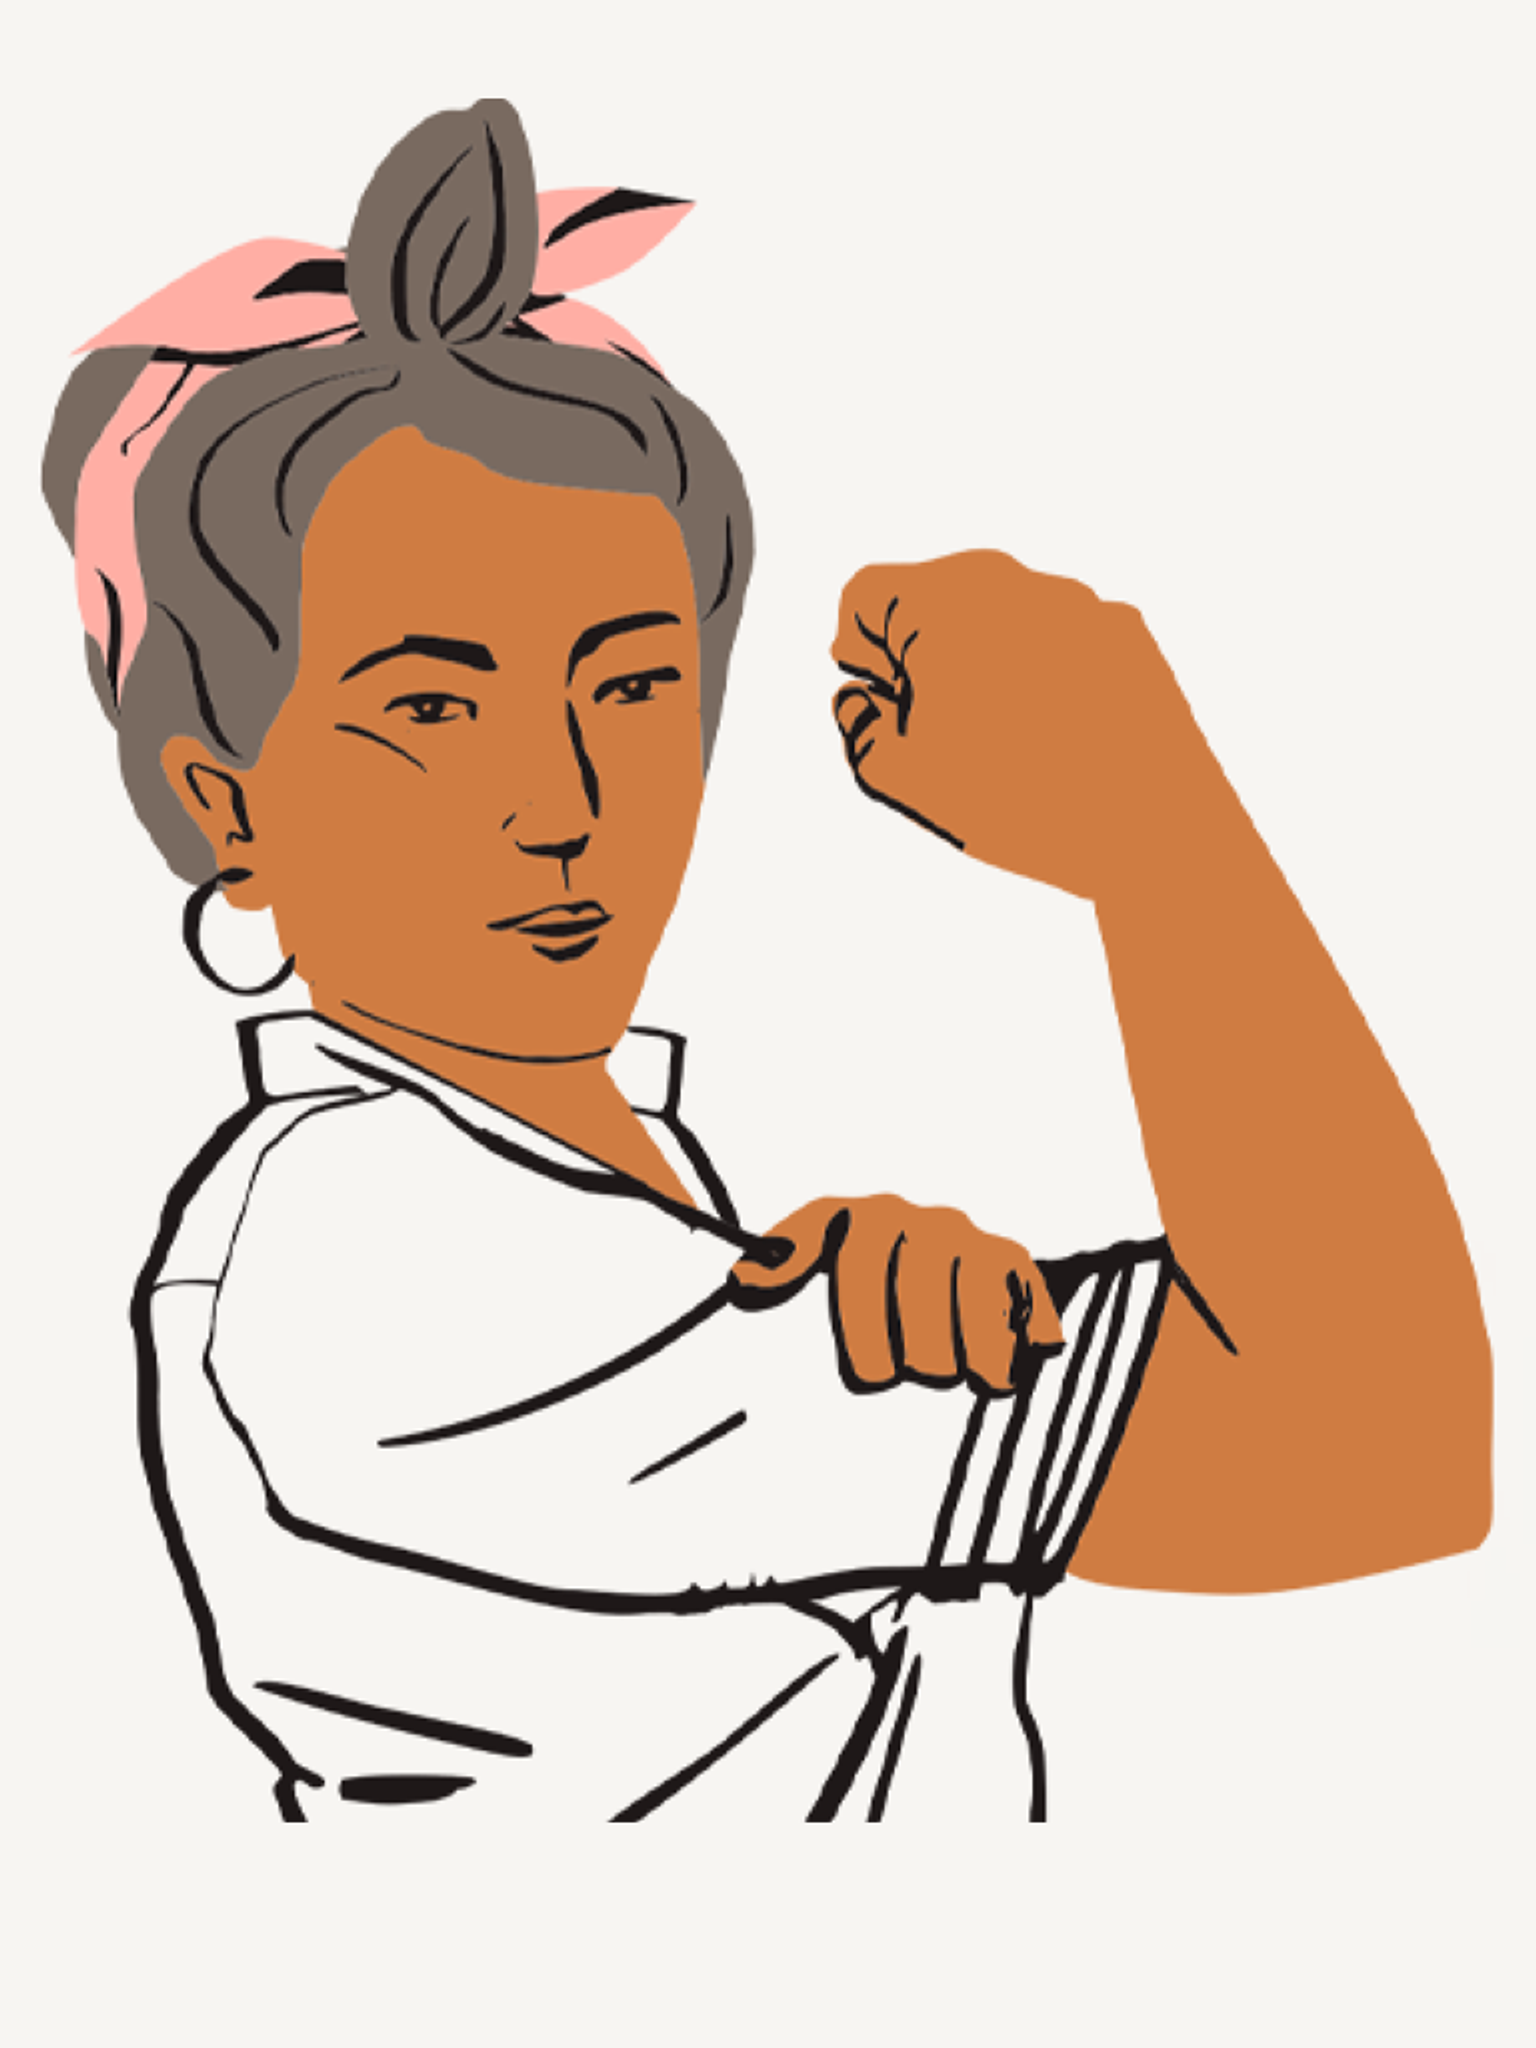 Illustration of a person with a headscarf and raised fist, symbolizing strength or empowerment.